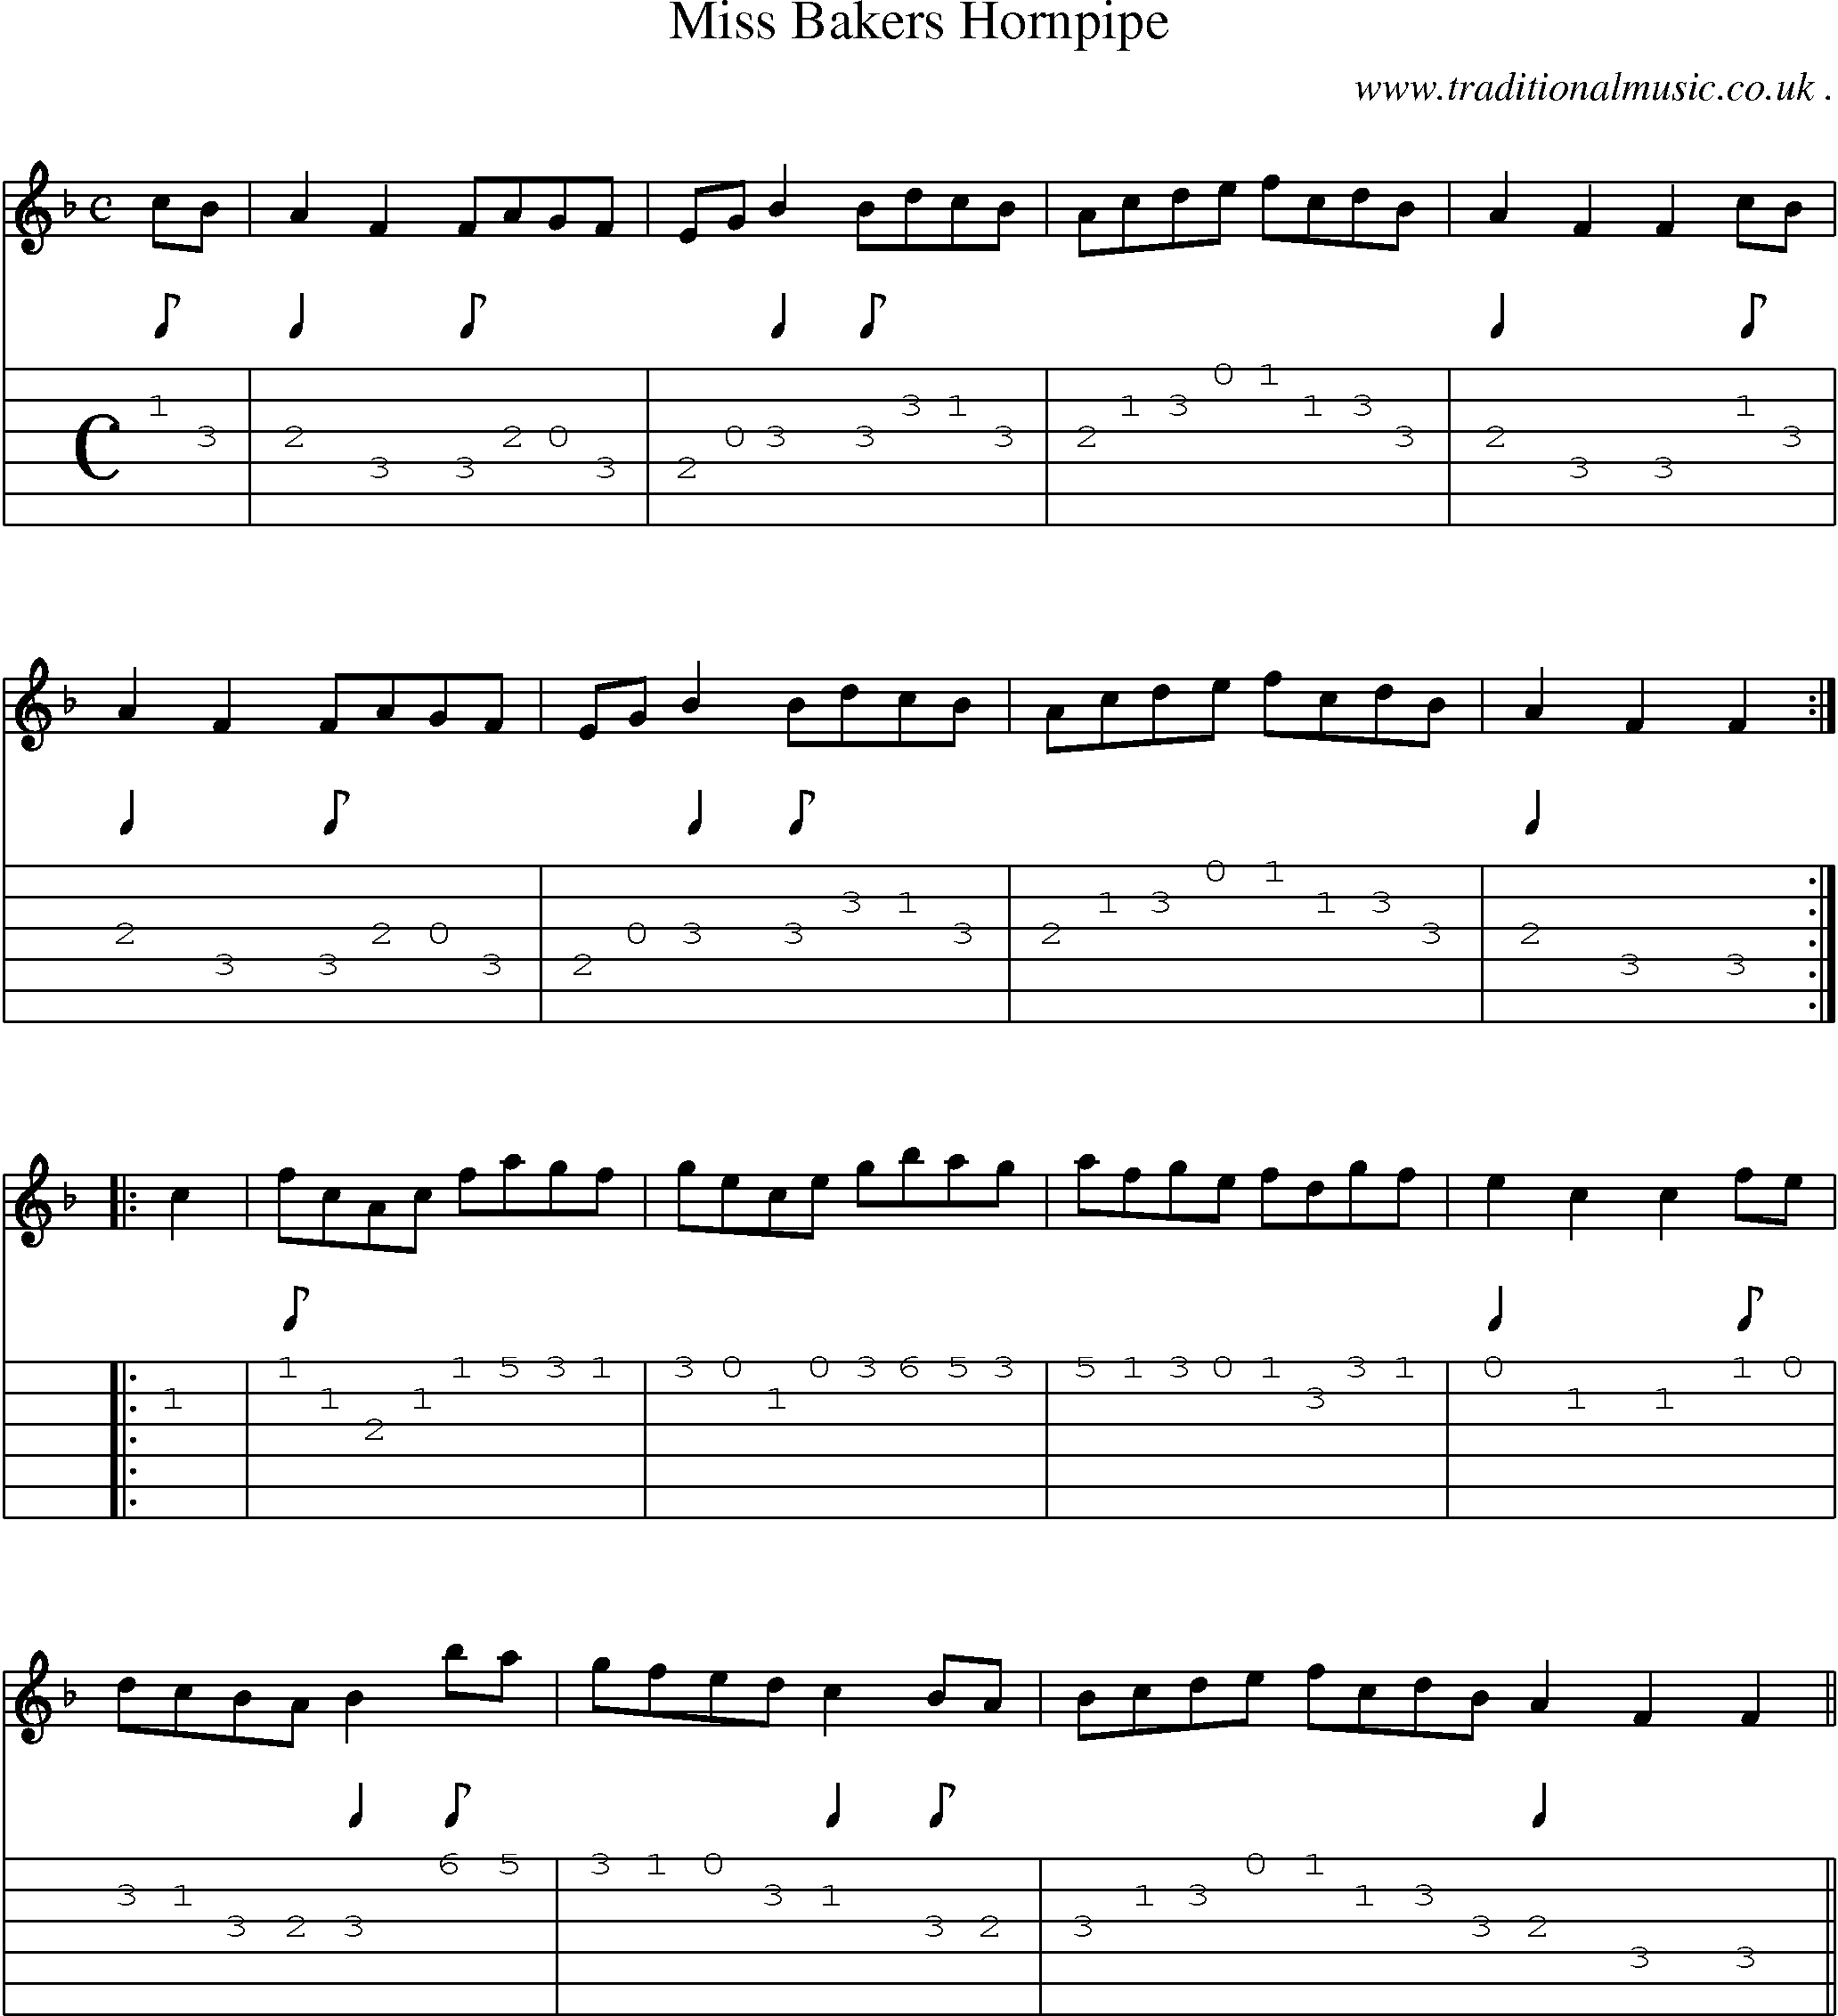 Sheet-Music and Guitar Tabs for Miss Bakers Hornpipe